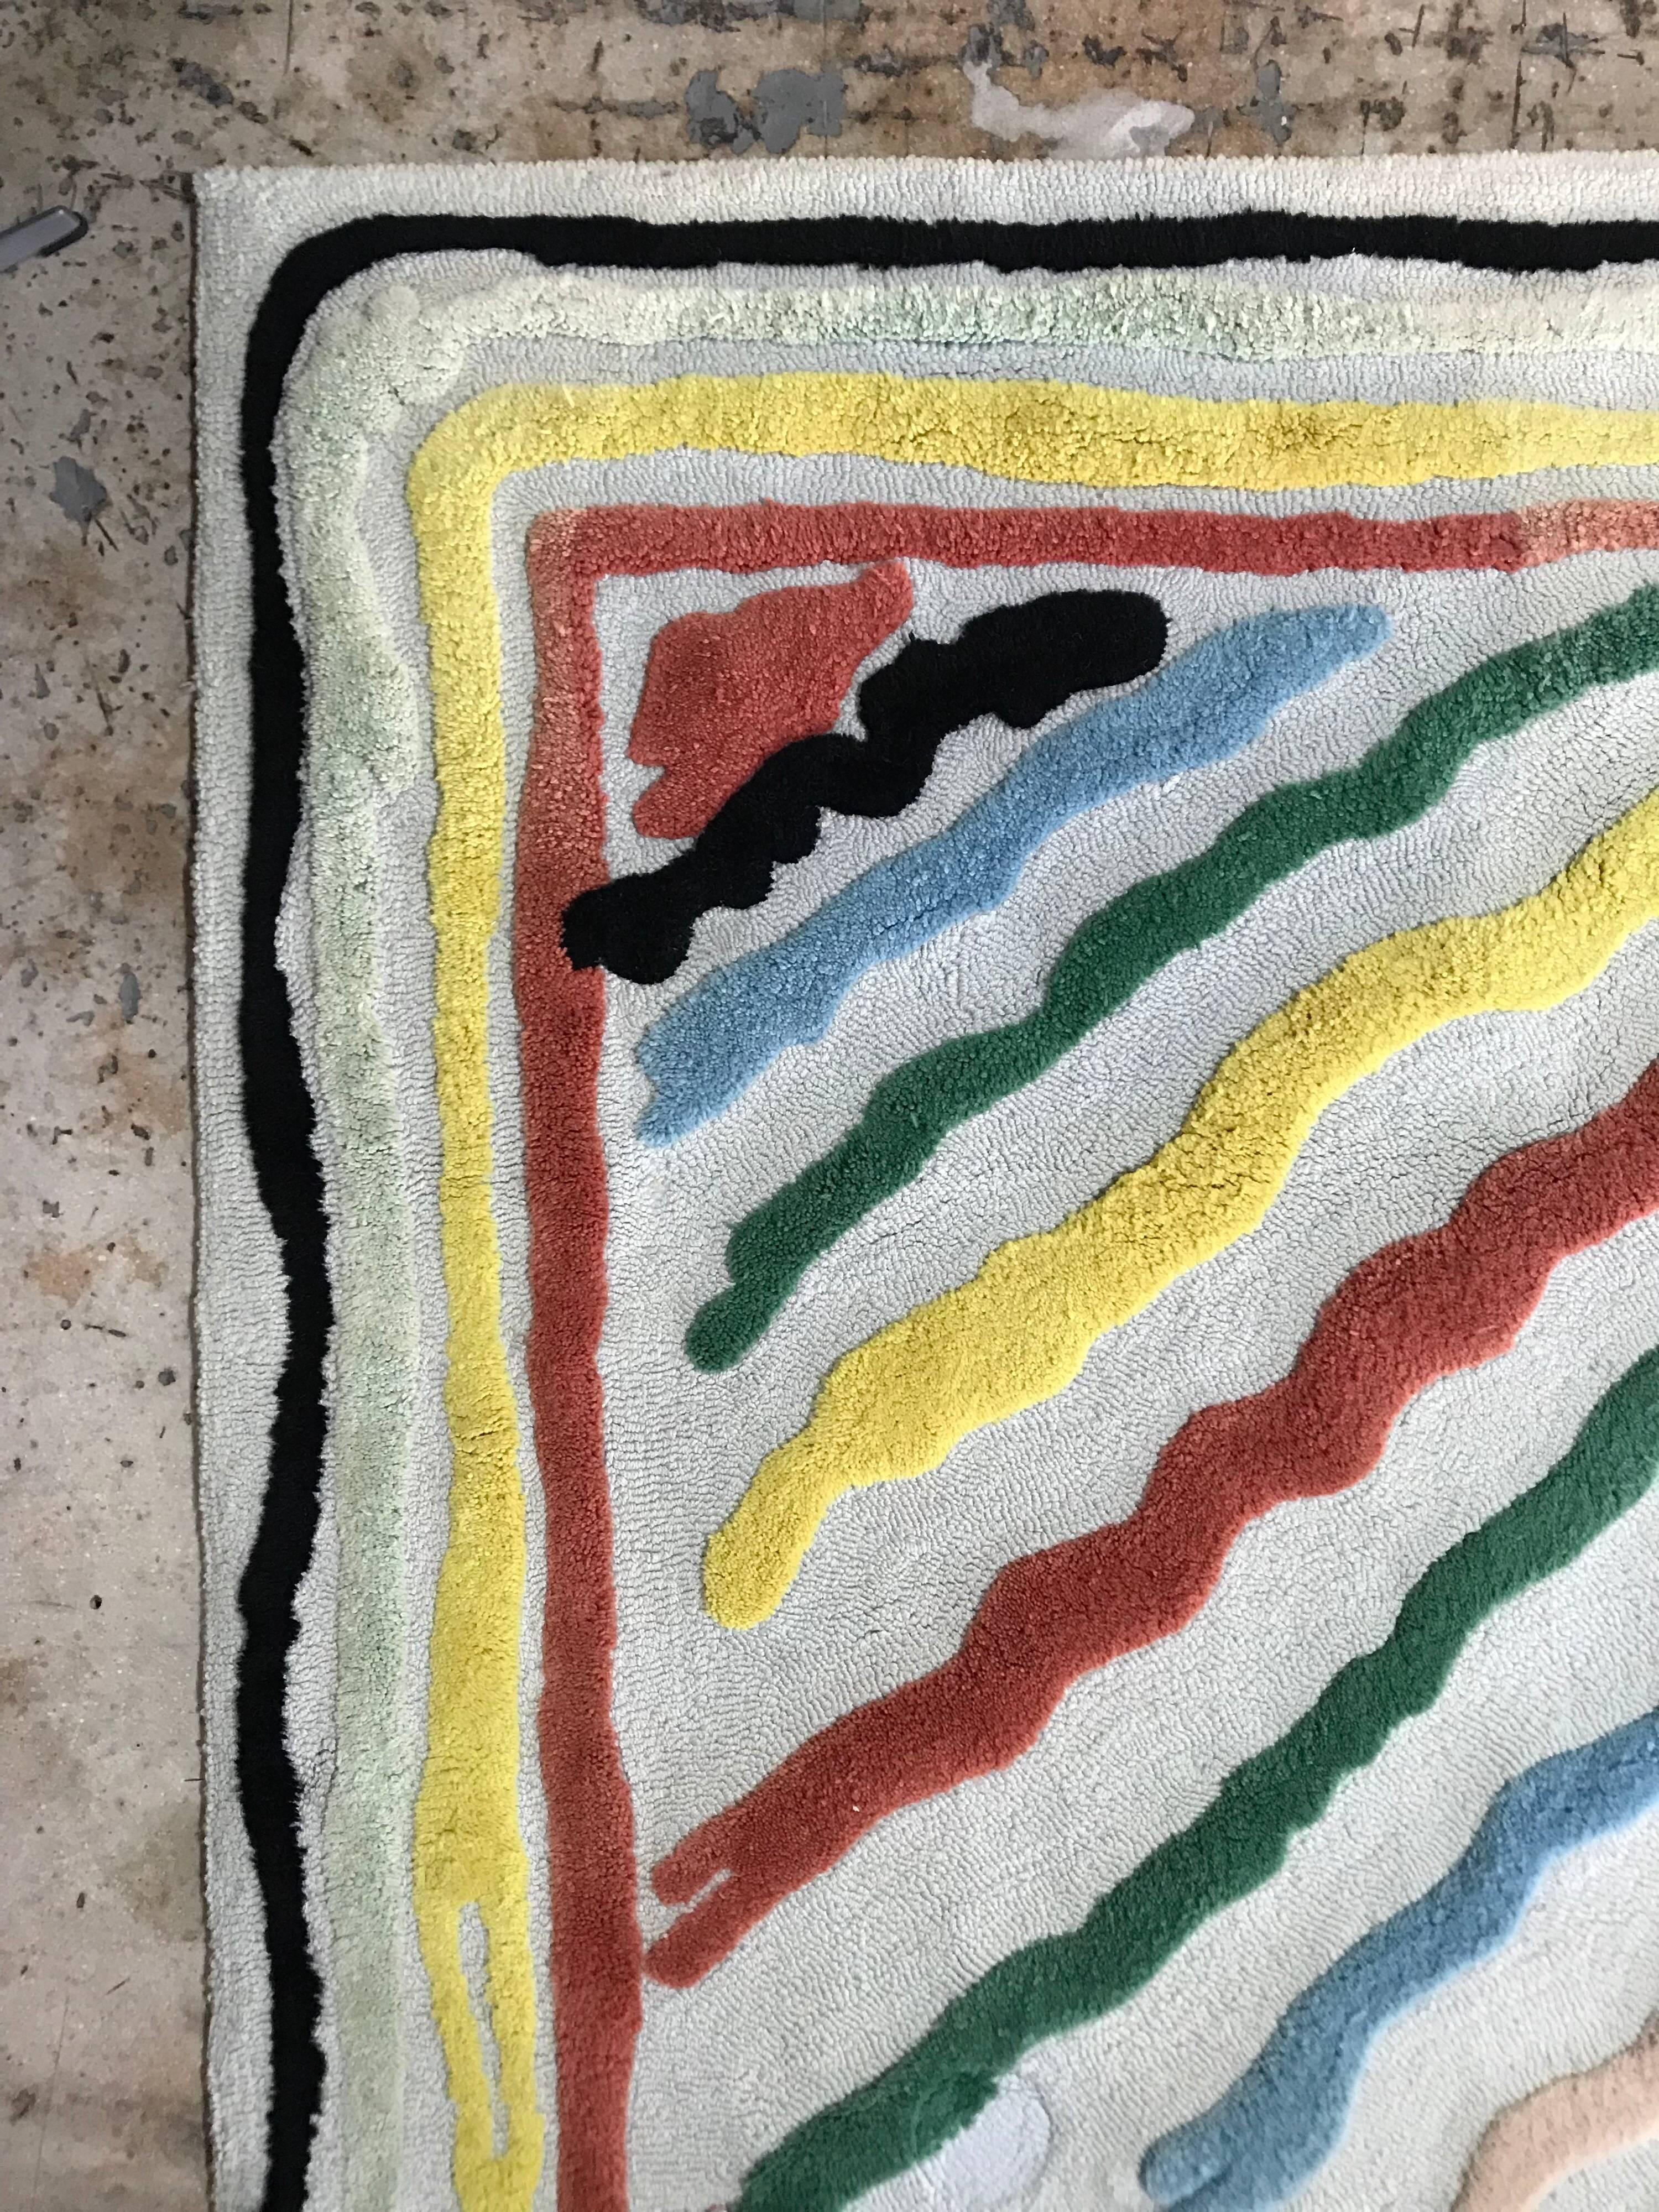 Colorful wool rug with two different pile heights and borders in the style of Edward fields rugs, signed by artist.
Measures: 9’ x 12’.